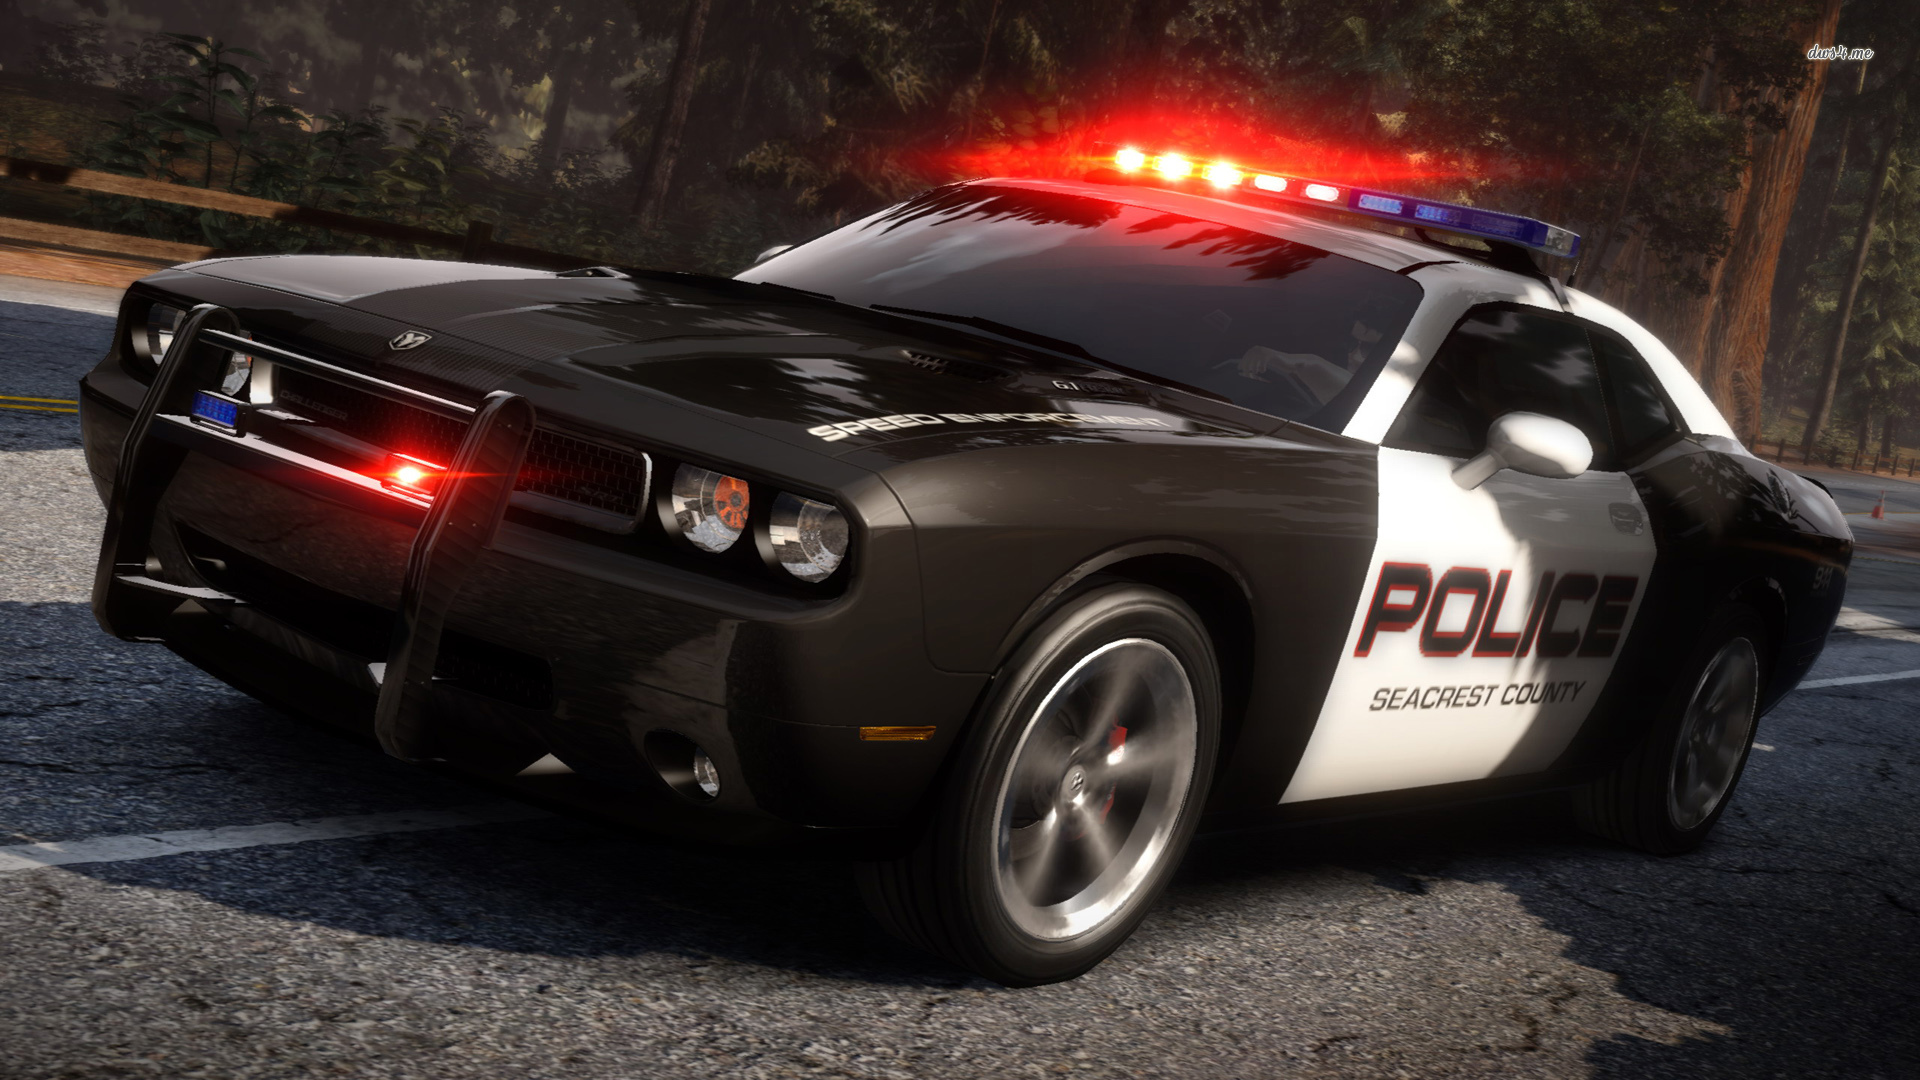 Need For Speed Hot Pursuit Dodge Challenger - HD Wallpaper 